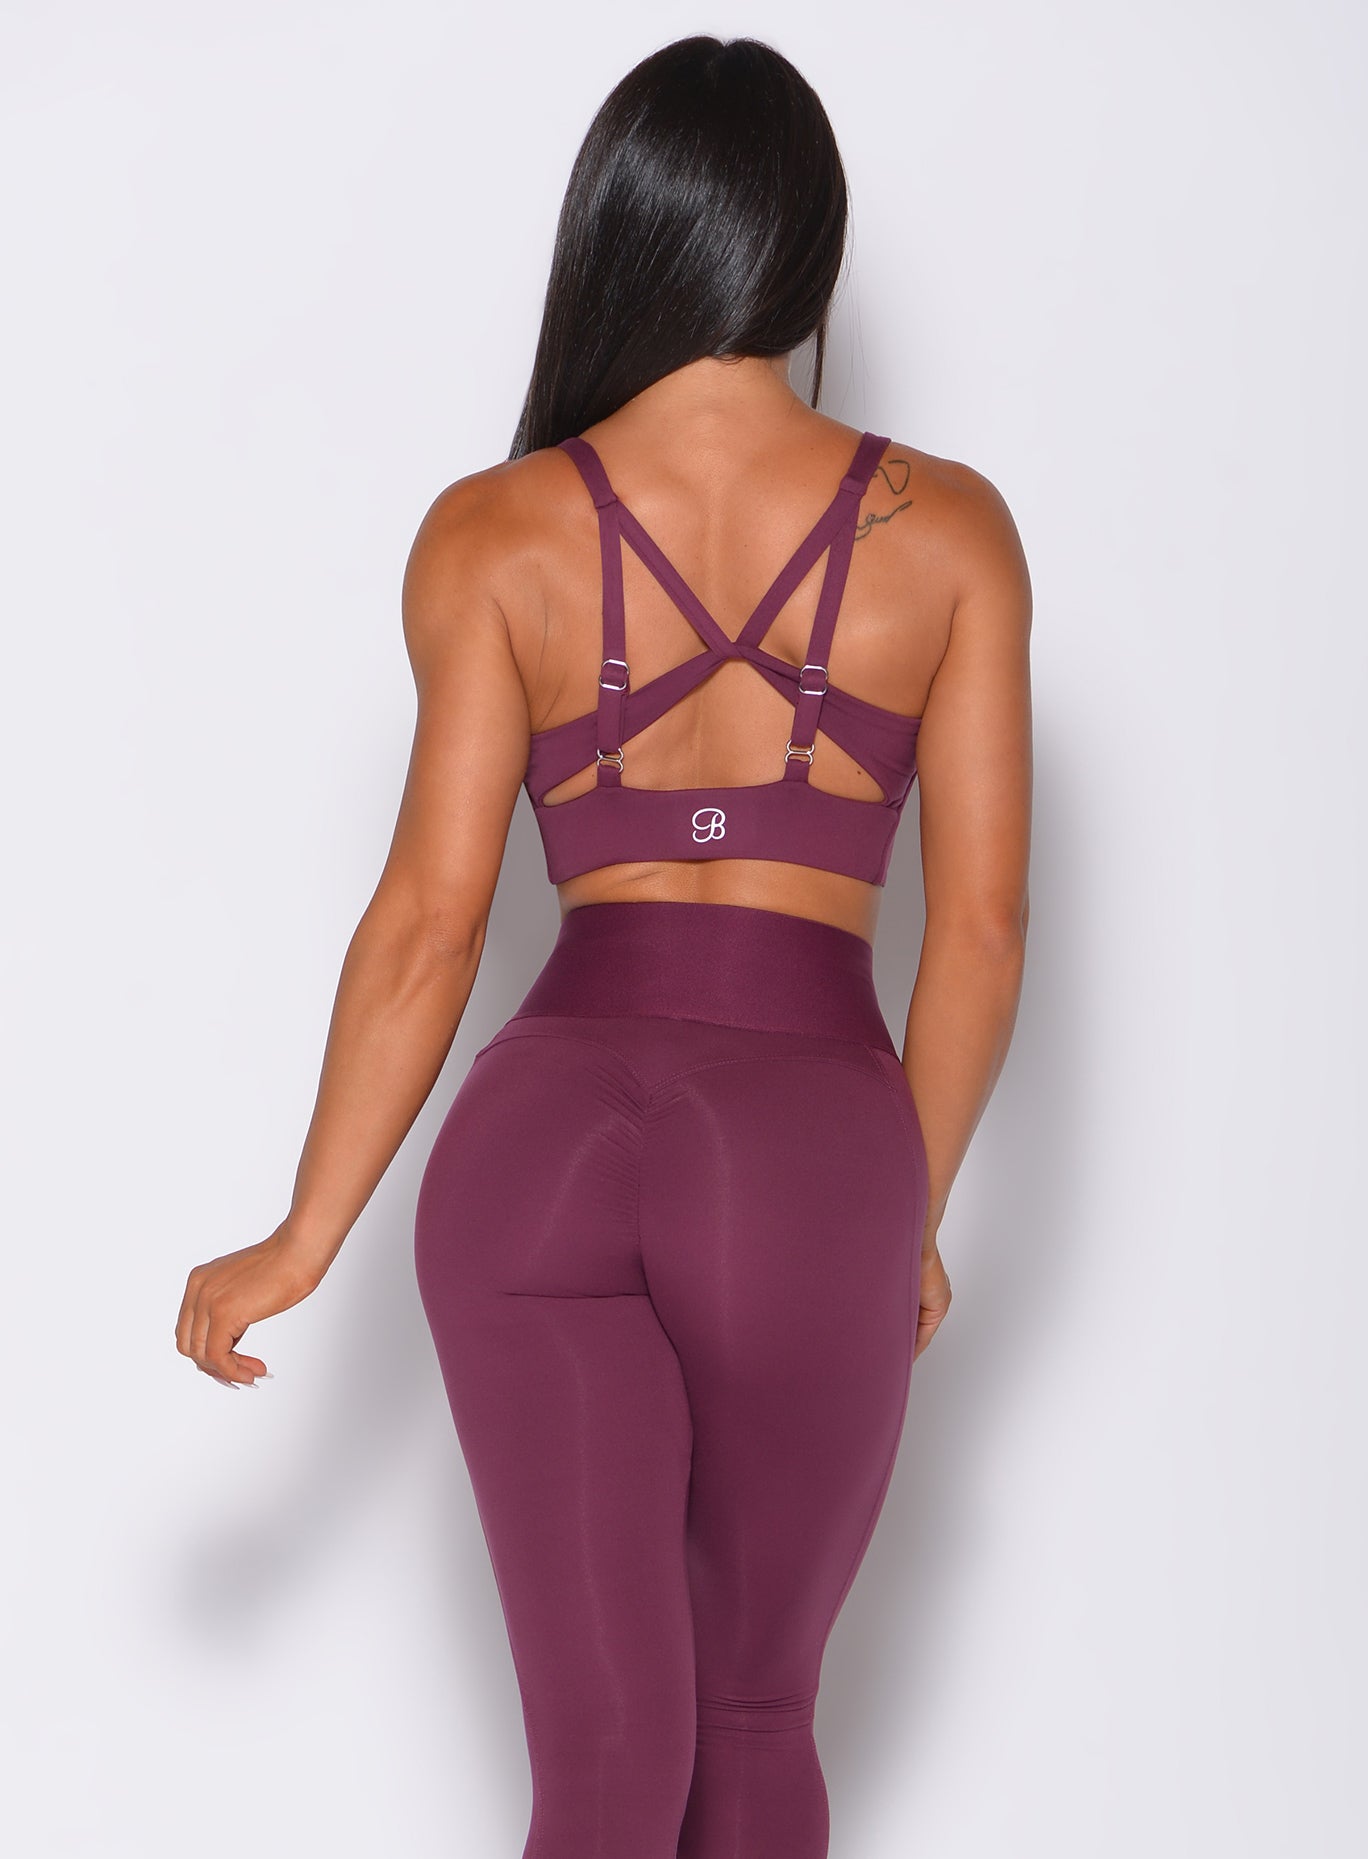 Back profile view of a model wearing our impact sports bra in majestic purple color and a matching leggings